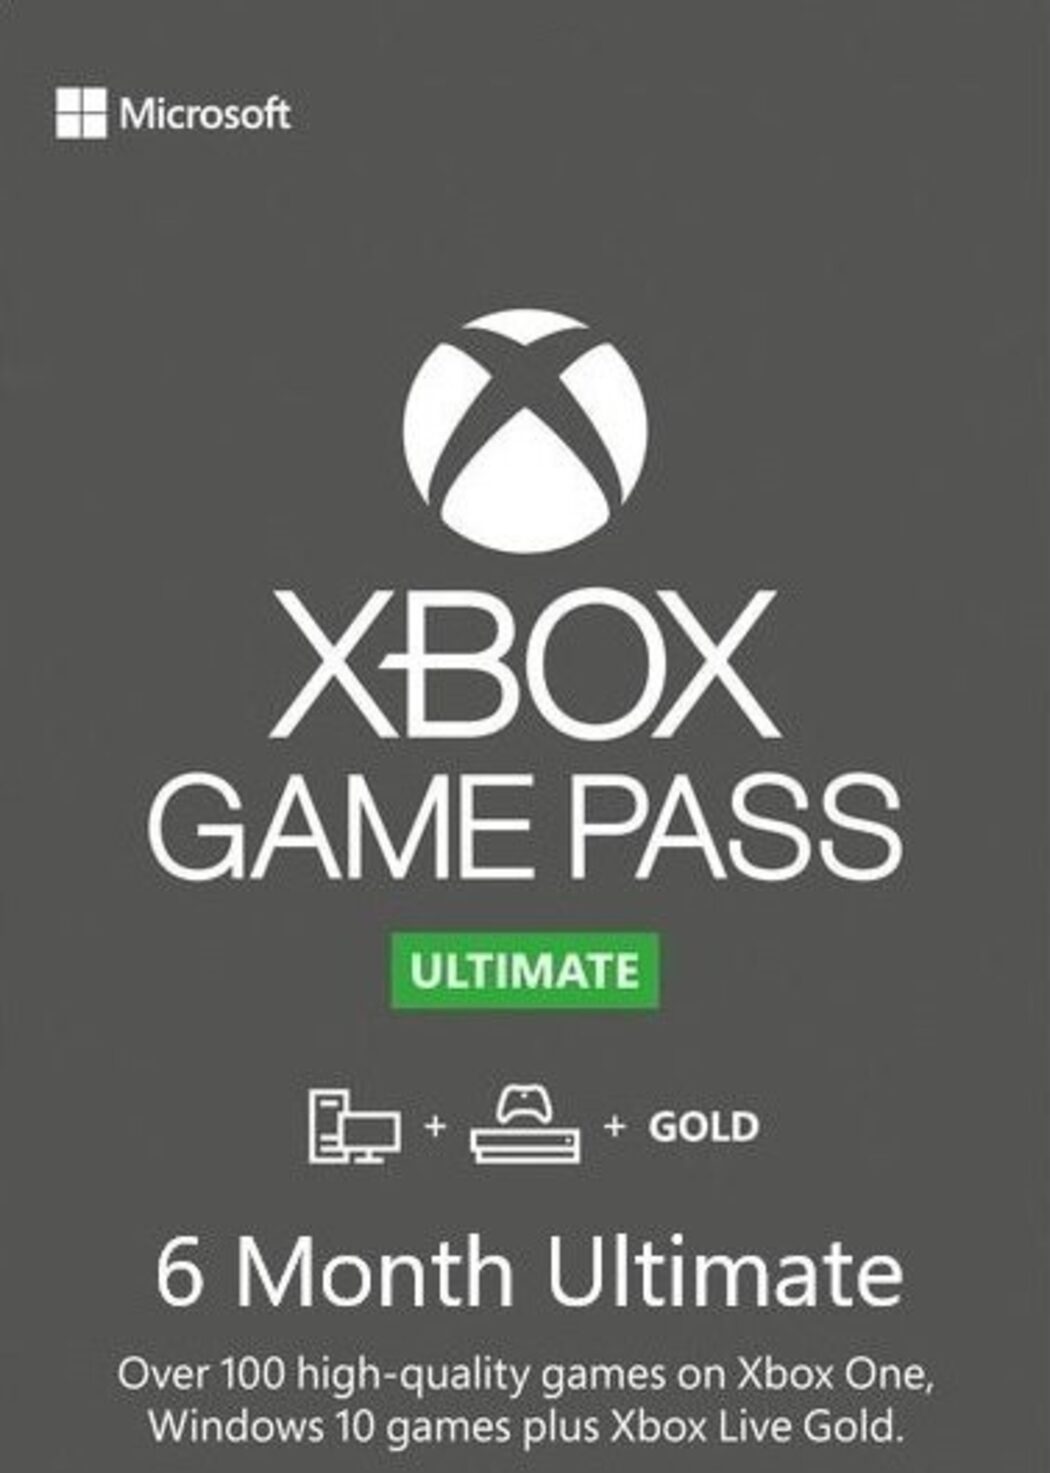 XBOX GAME PASS ULTIMATE 6 MONTHS (XBOX ONE) cheap - Price of $28.47